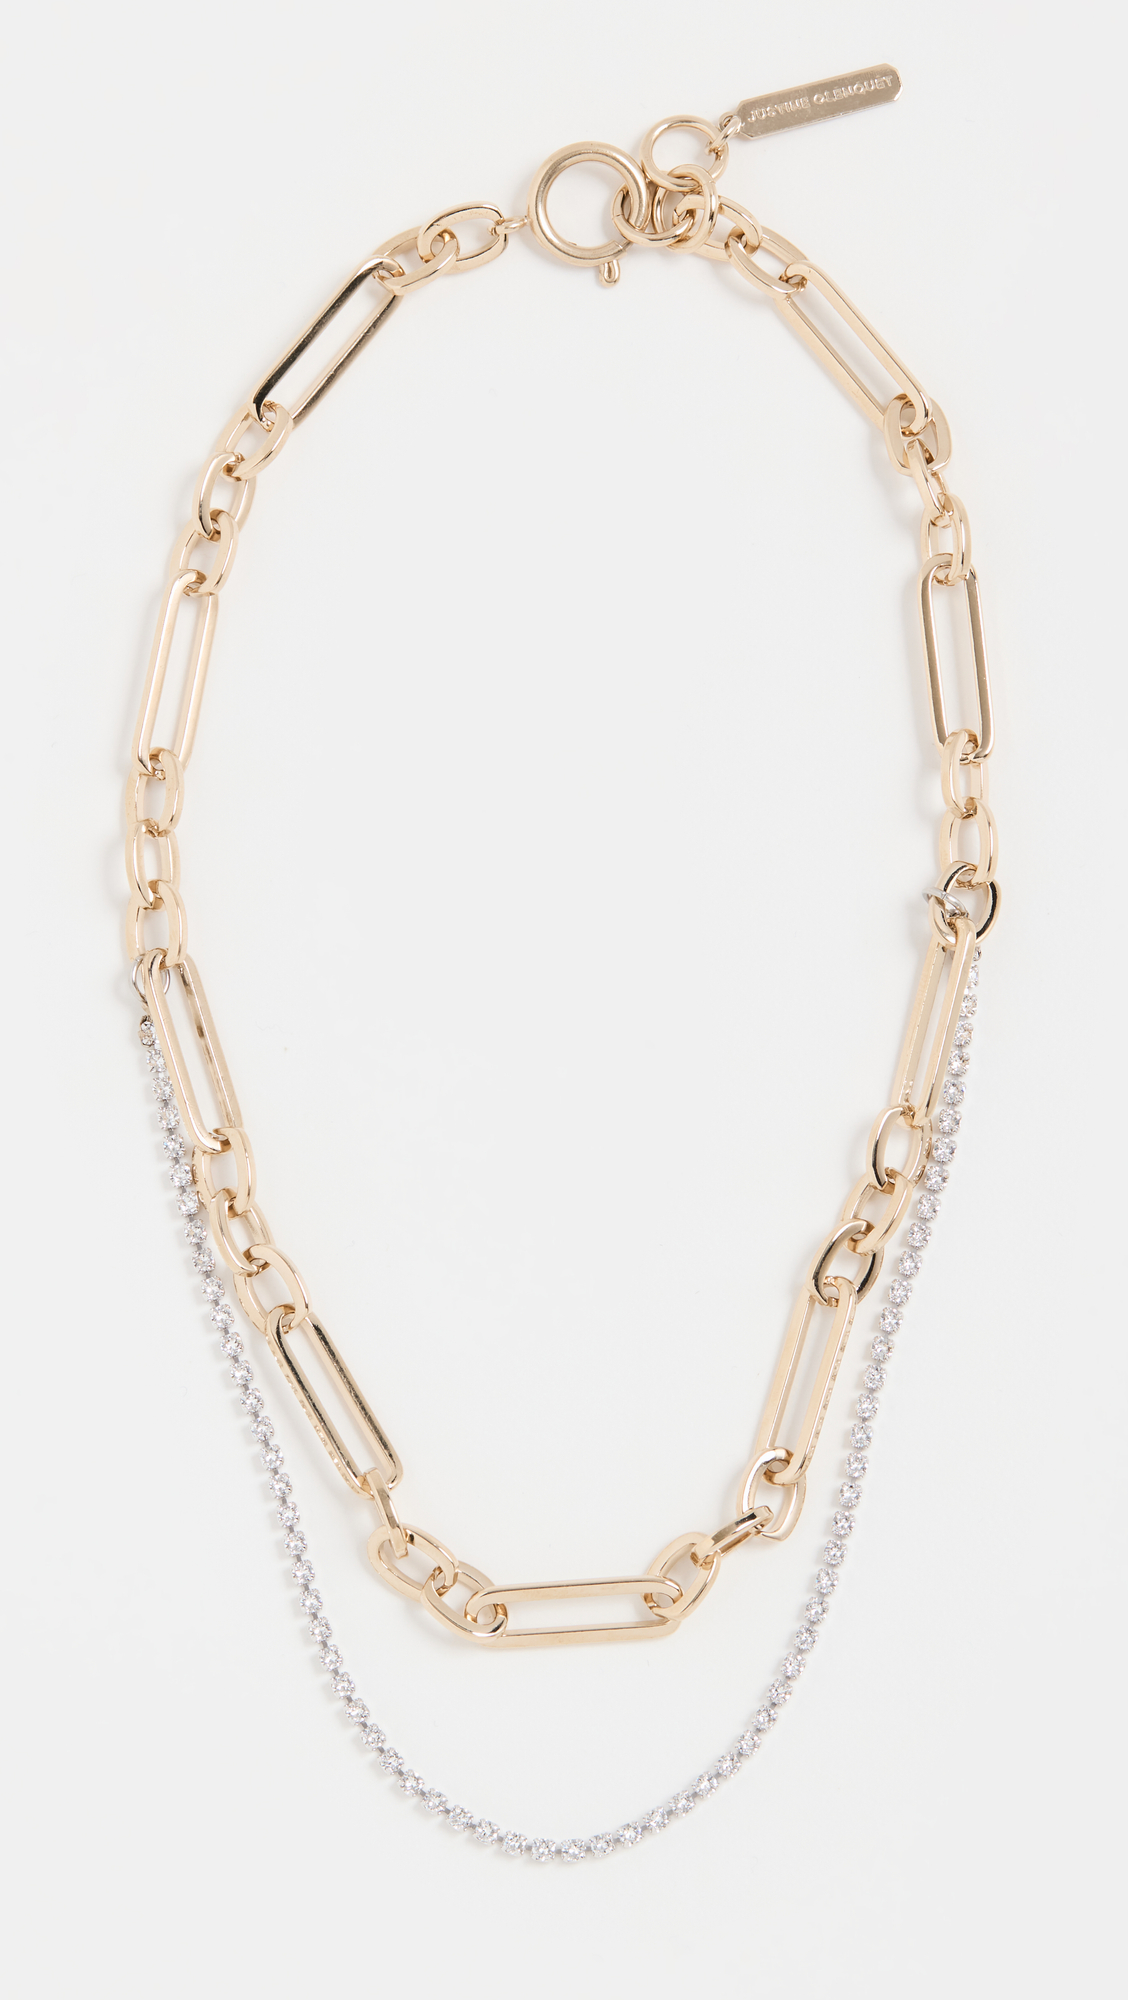 3 Easy Tricks to Untangle Necklaces